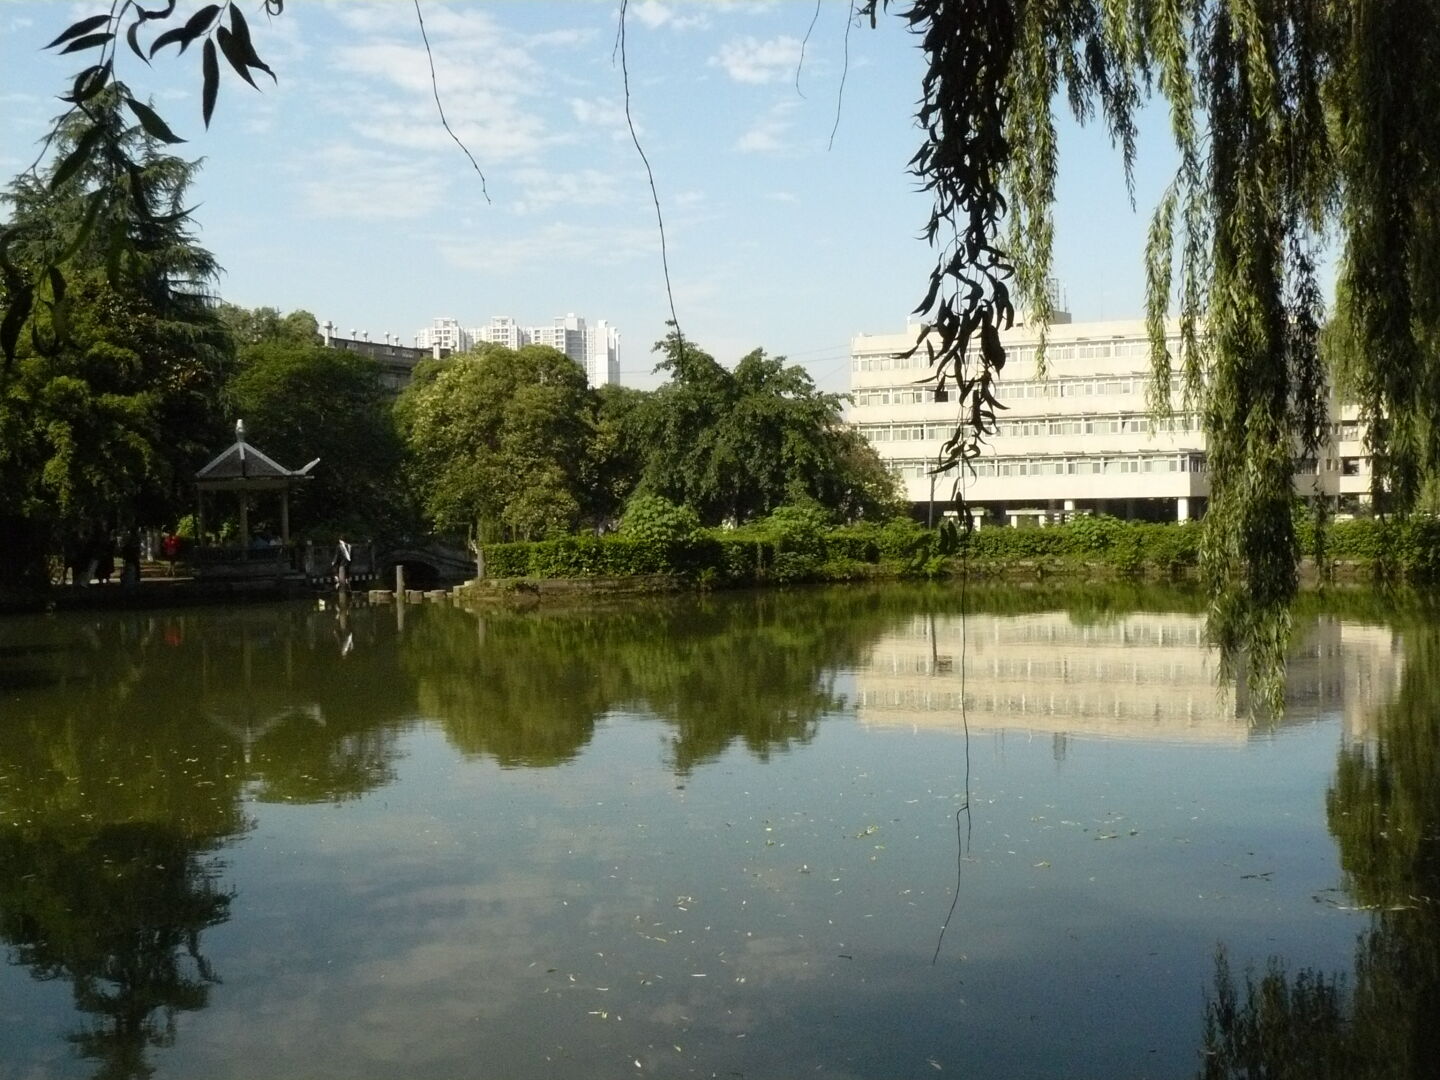 In the middle of the old campus, there is this artificial lake.